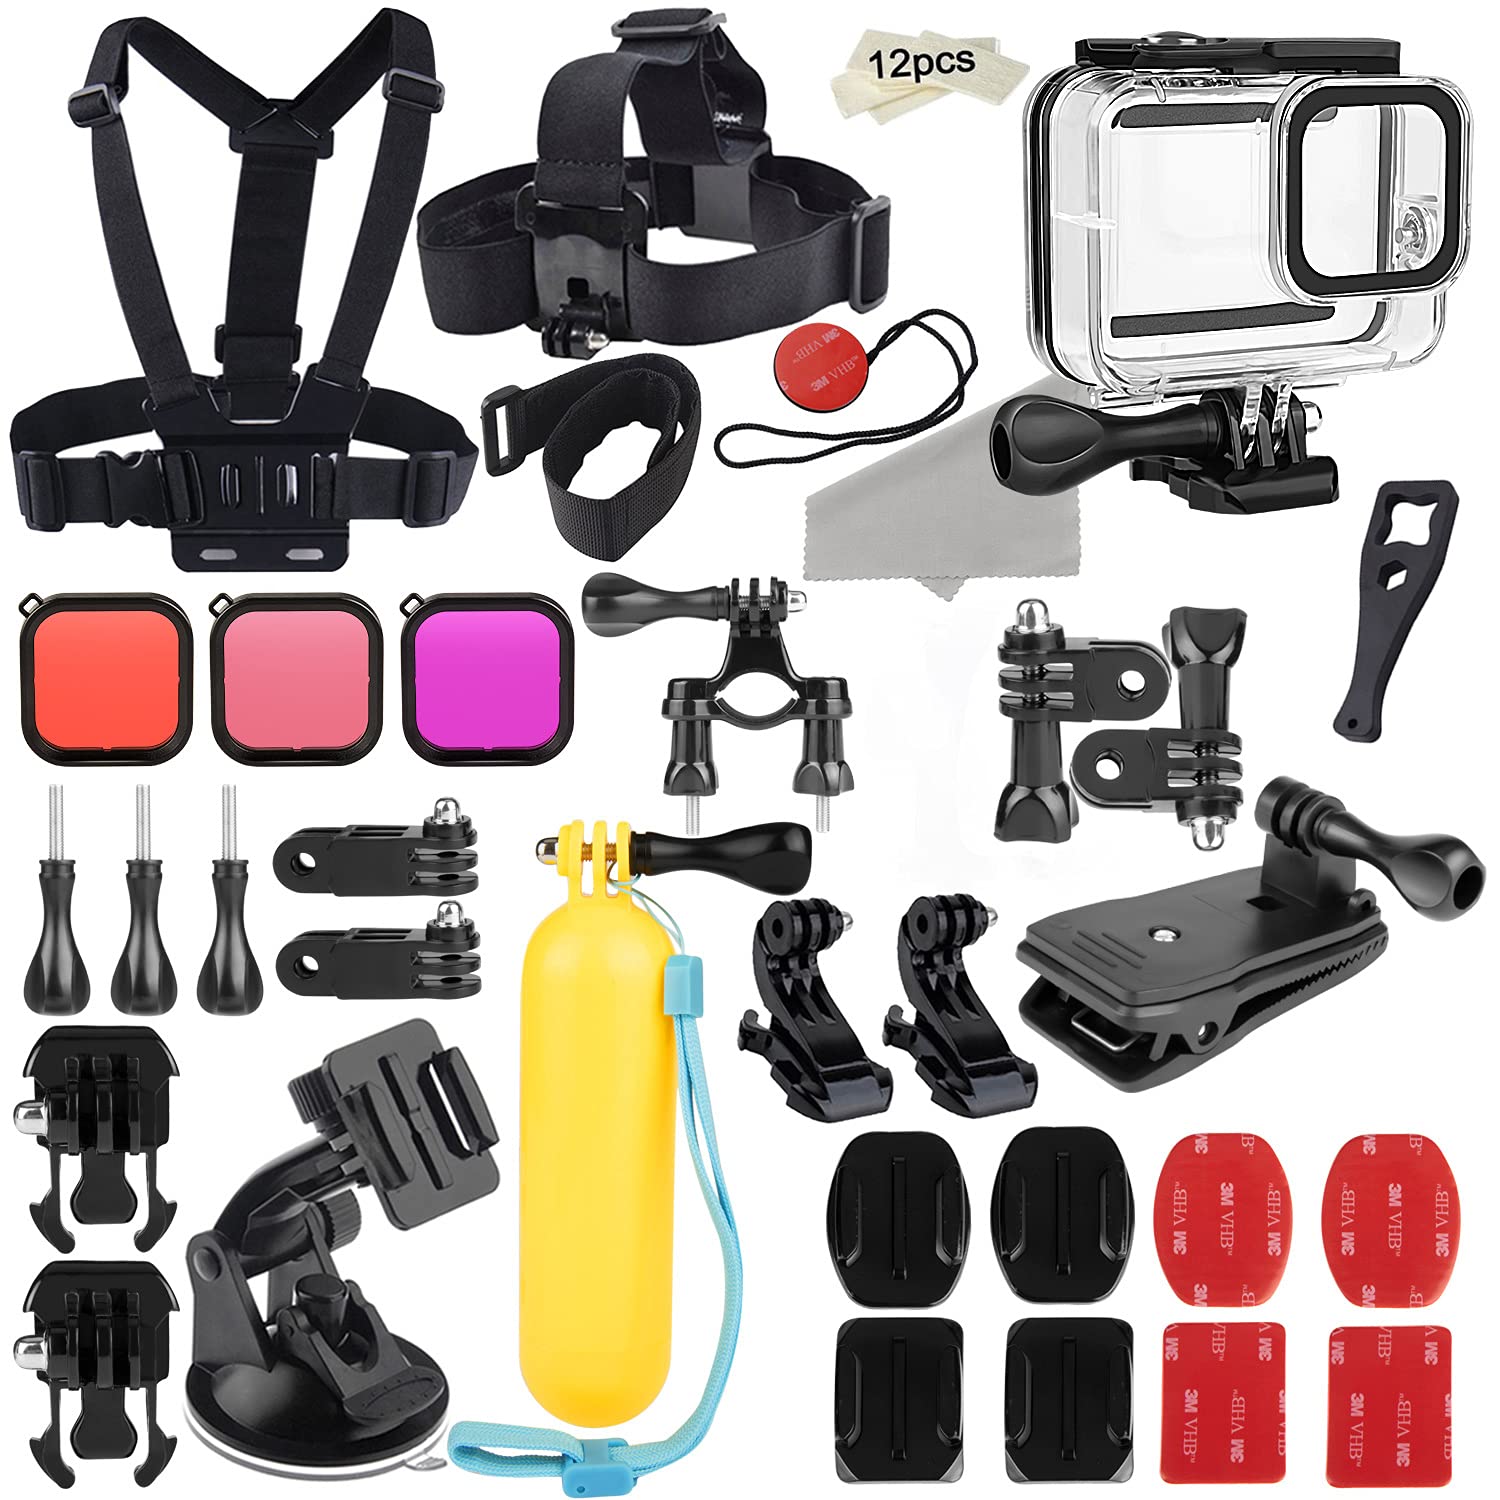 52-in-1 Accessories Kit Compatible with GoPro Hero 8 Black, Waterproof  Housing Case + Filters + Head Chest Strap + Suction Cup Mount + Bicycle  Mount + Floating Grip Accessories for Gopro 8 Black